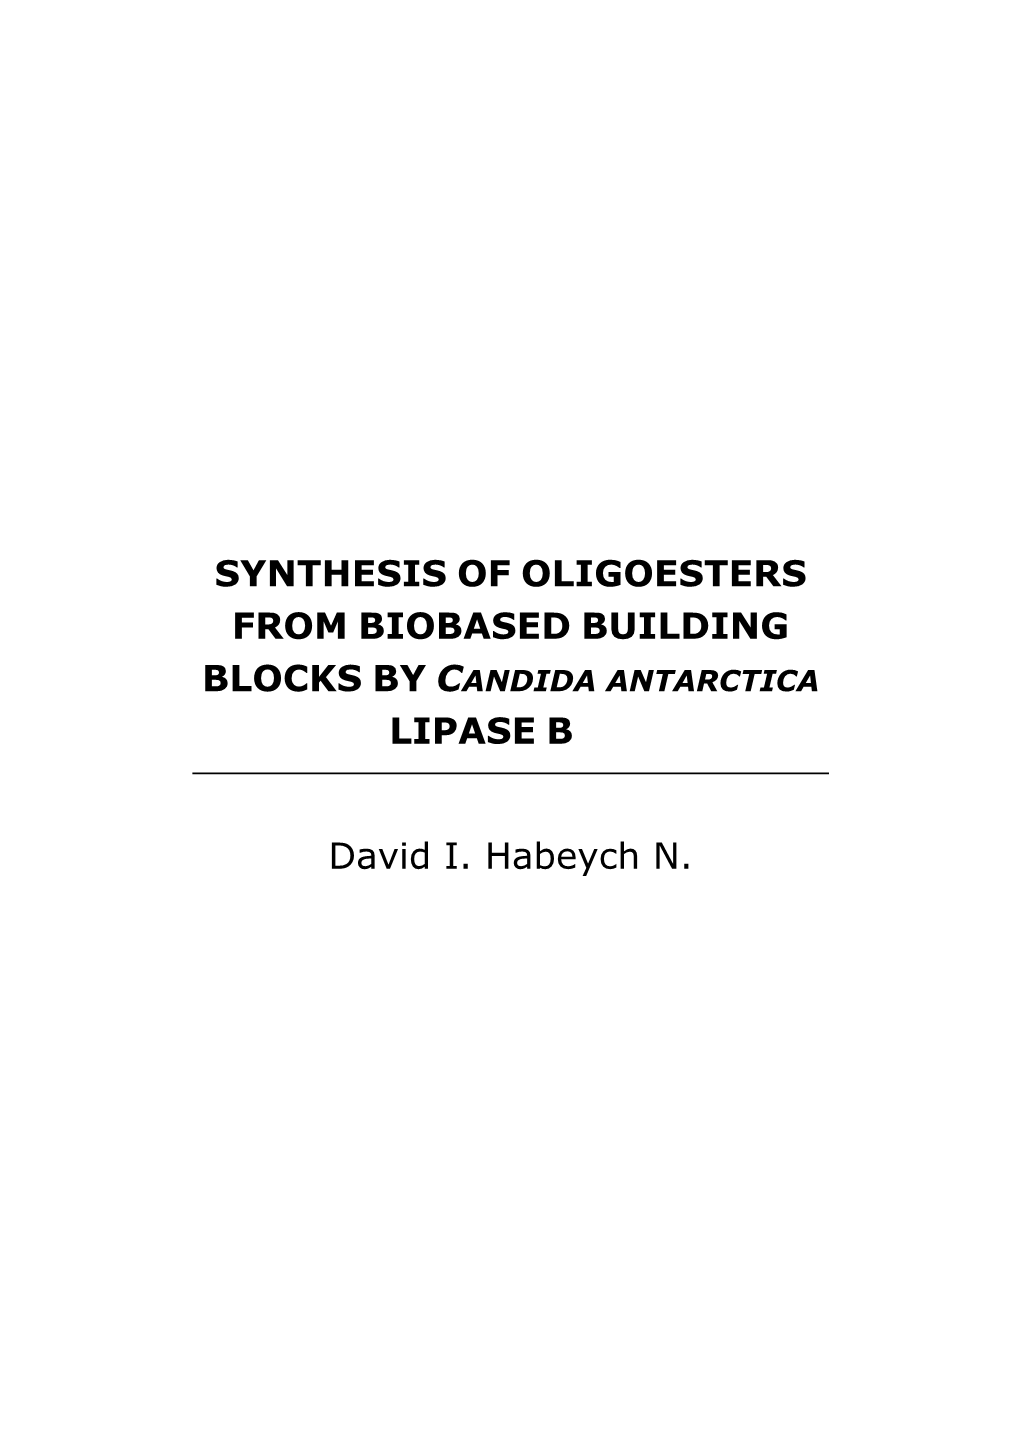 Synthesis of Oligoesters from Biobased Building Blocks by Candida Antarctica Lipase B